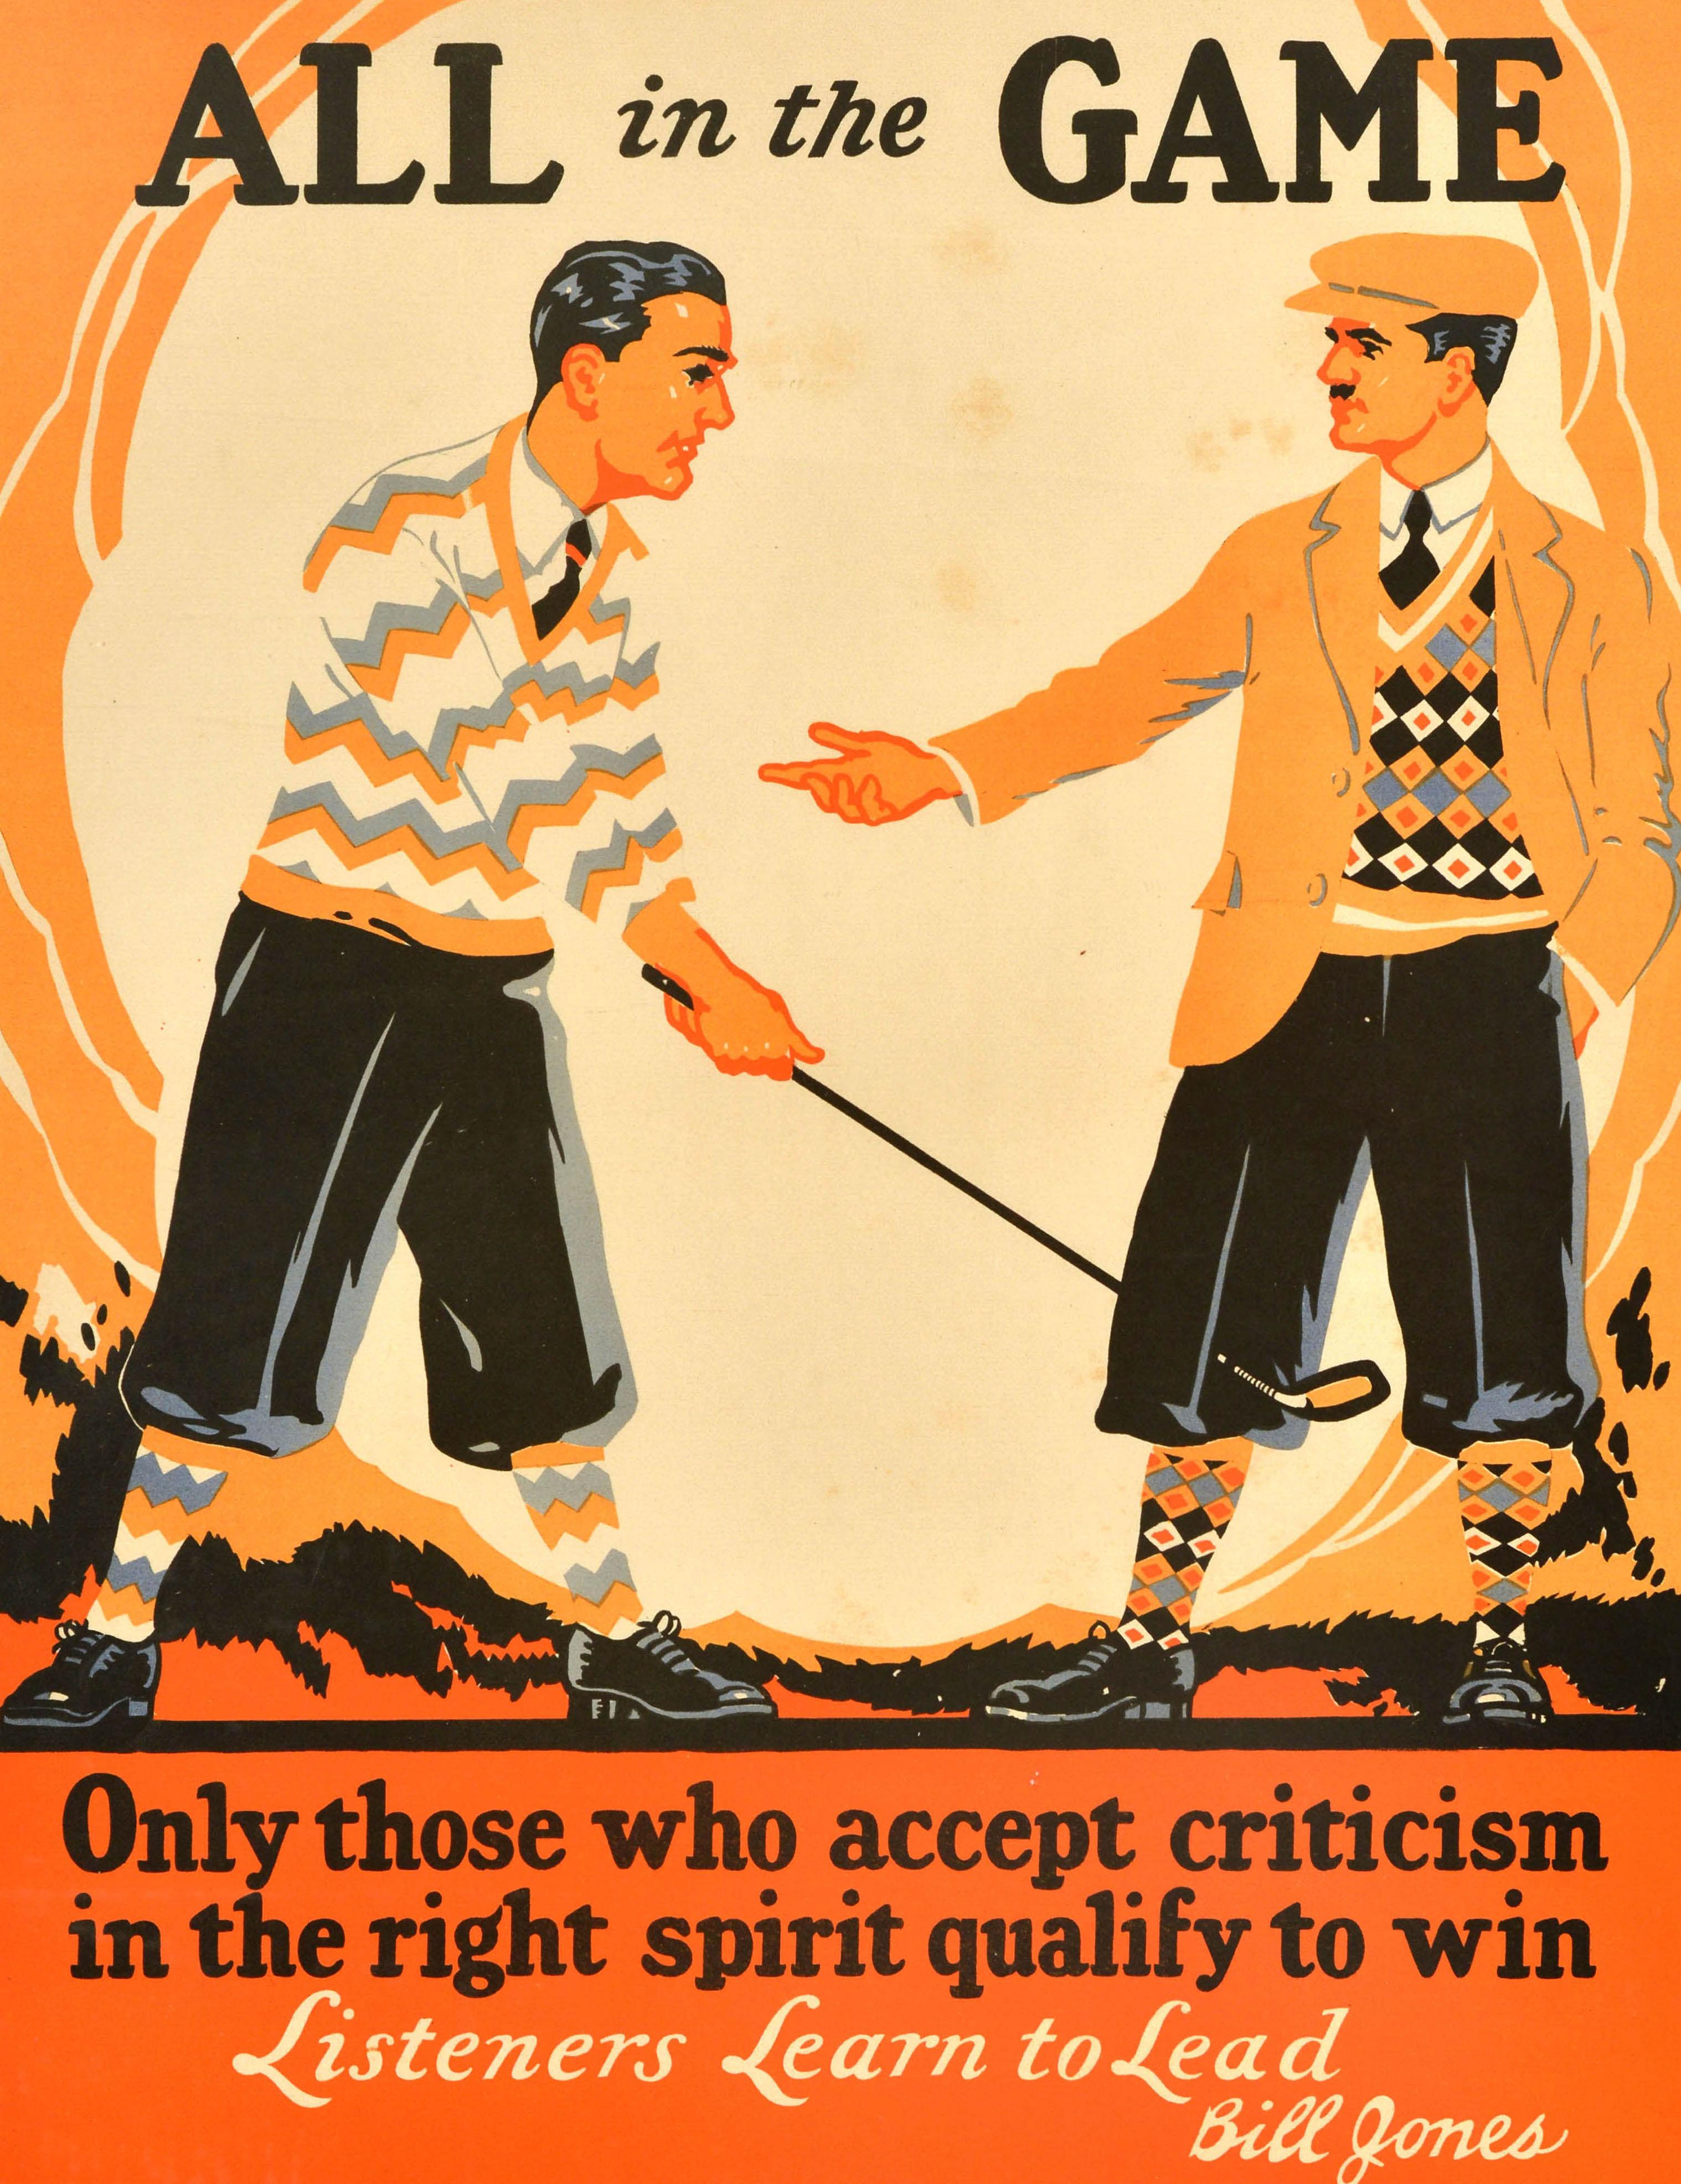 Original vintage workplace motivational poster - All in the Game Only those who accept criticism in the right spirit qualify to win Listeners Learn to Lead Bill Jones - featuring a sport themed illustration of golf players wearing colourful jumpers